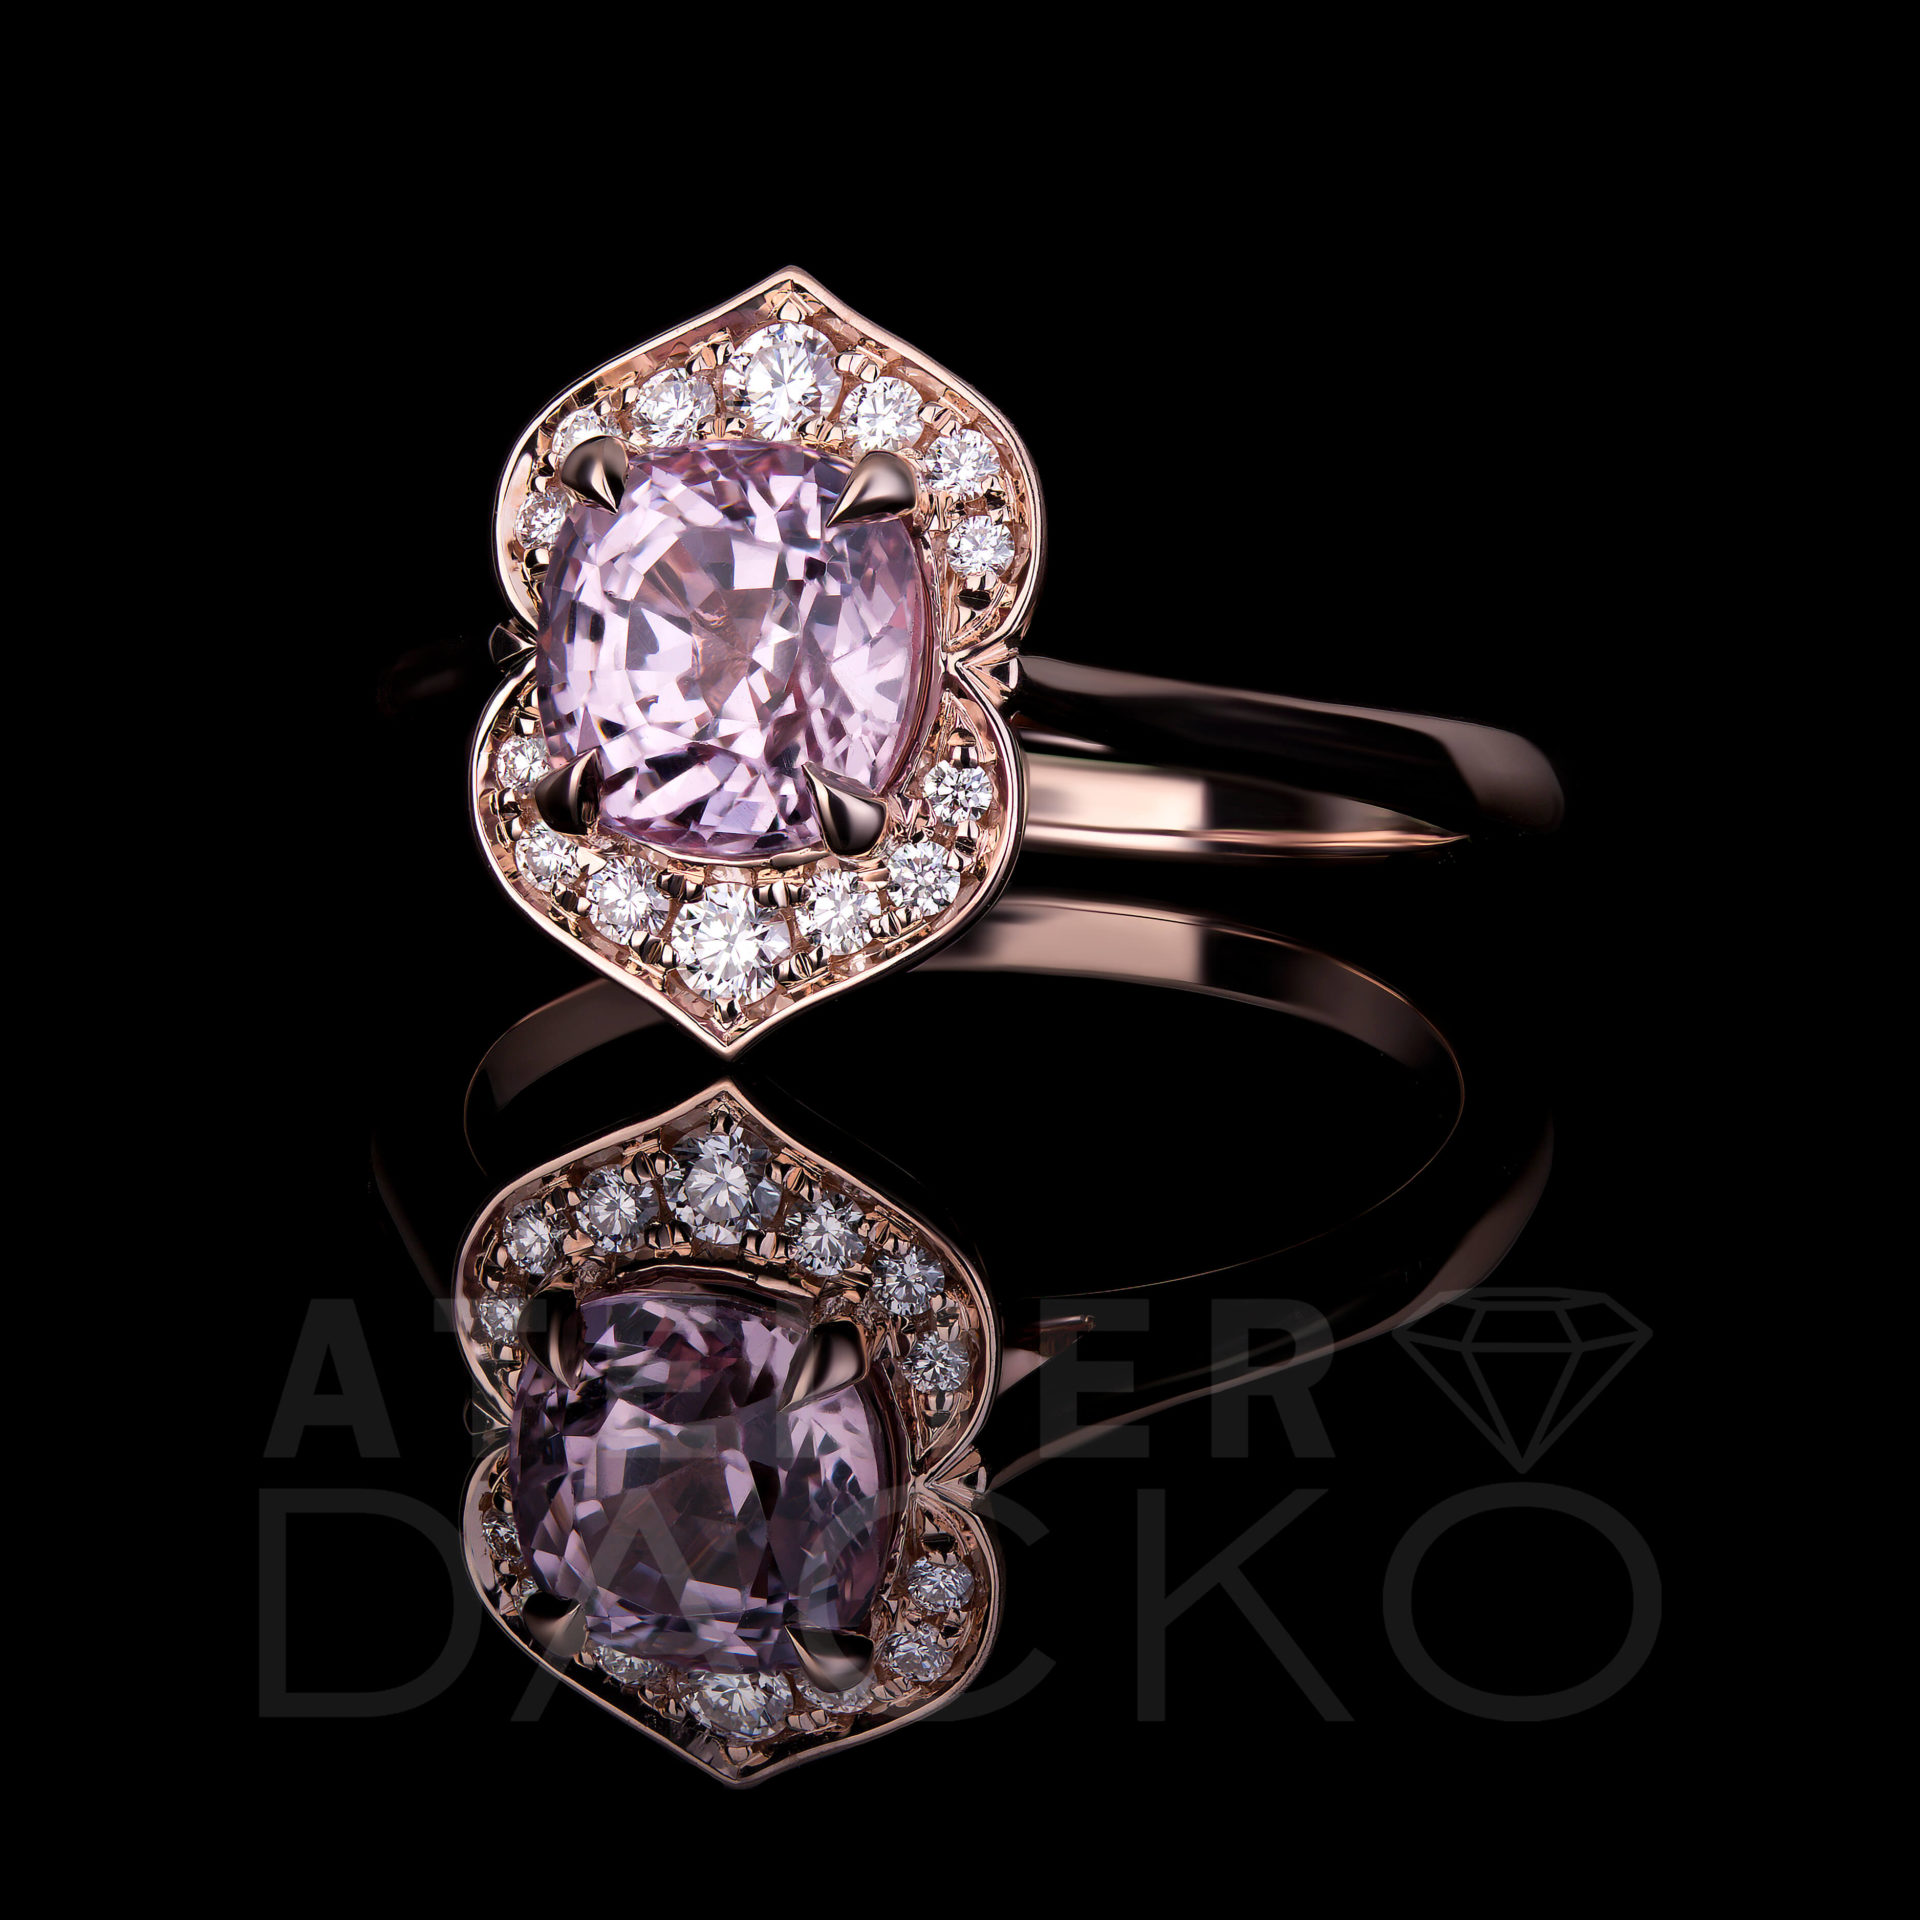 AD056 - 1.31 CT Cushion Pastel Pink Spinel Ring with Bright Cut Halo - 2